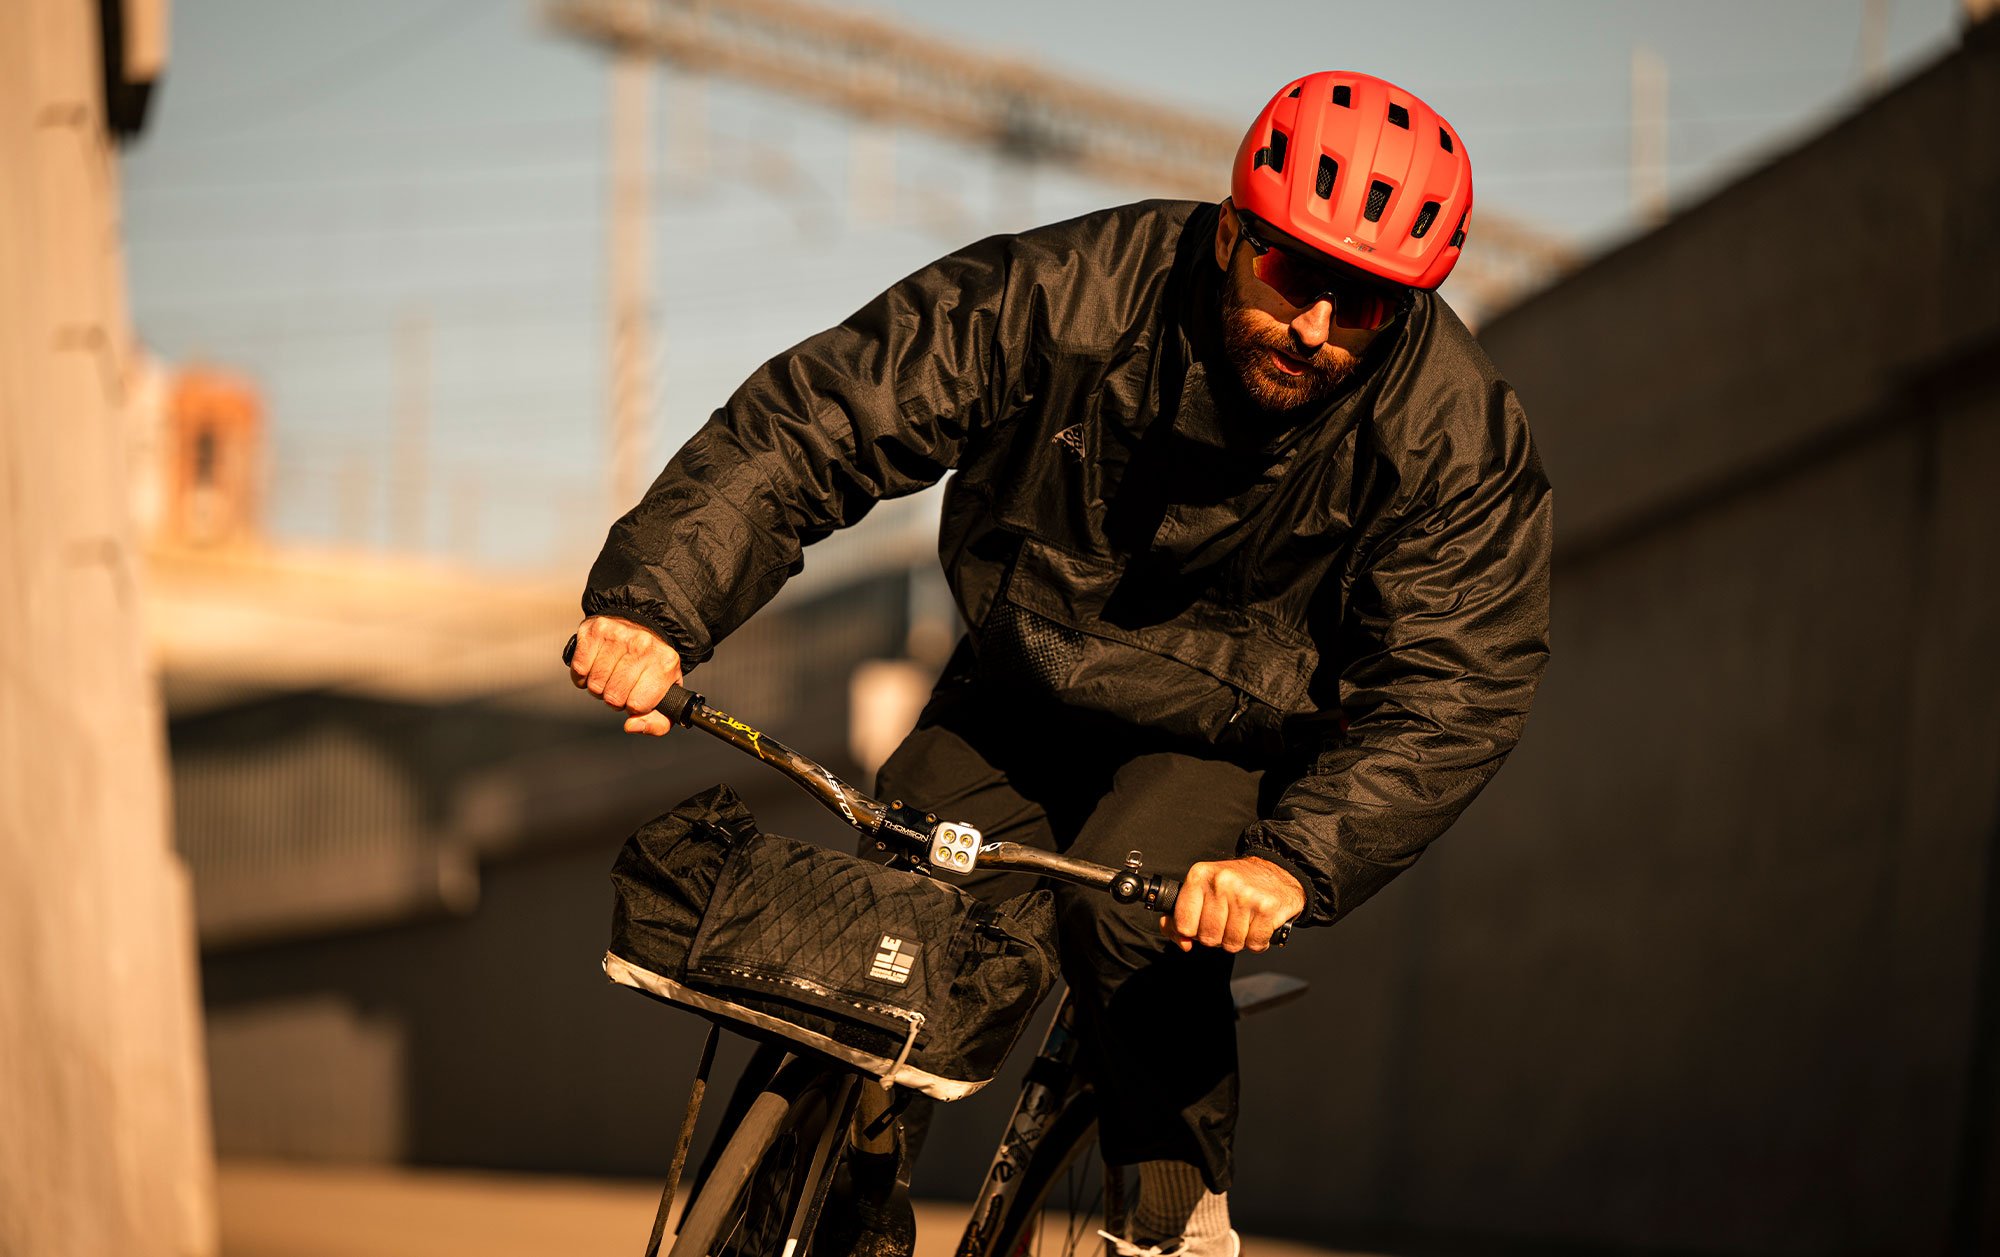 MET E-Mob is an E-Bike Urban Helmet with Rear USB LED light and it is NTA 8776 Certified.